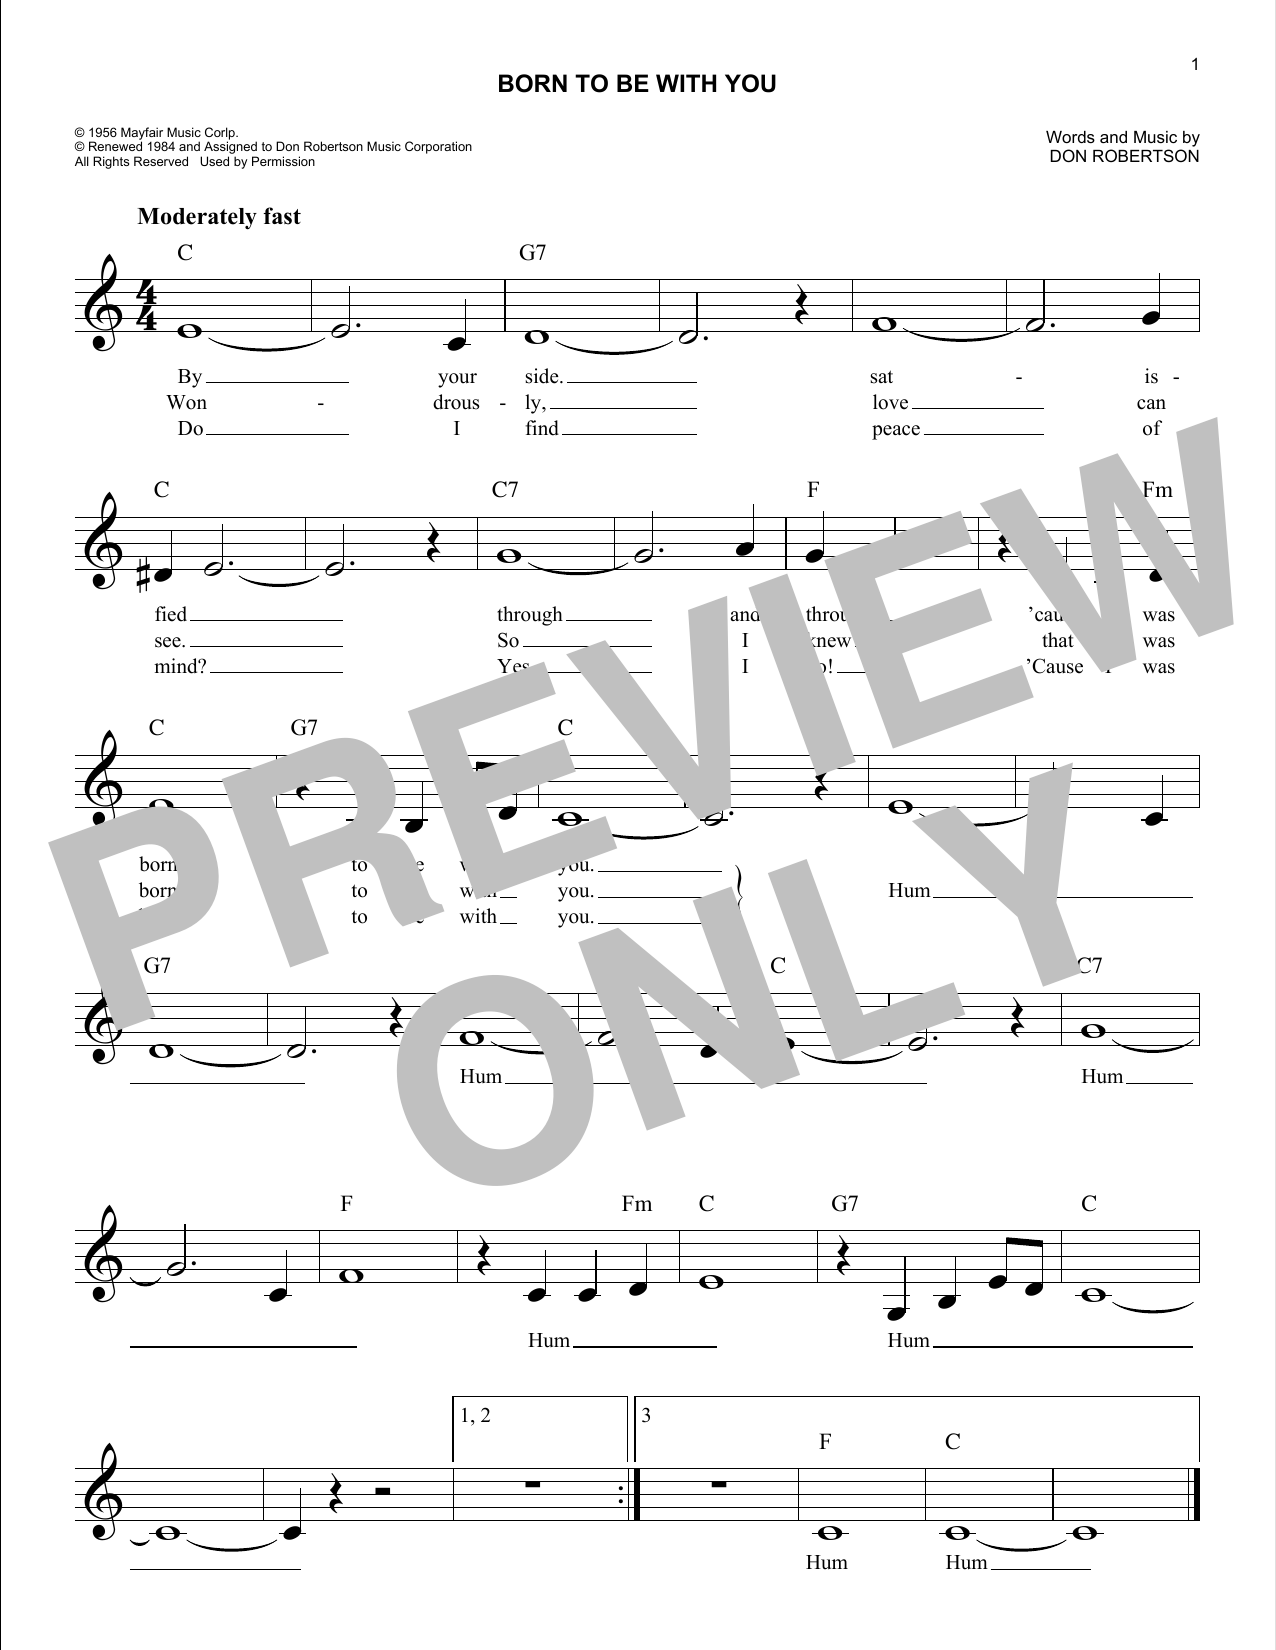 Download The Chordettes Born To Be With You Sheet Music